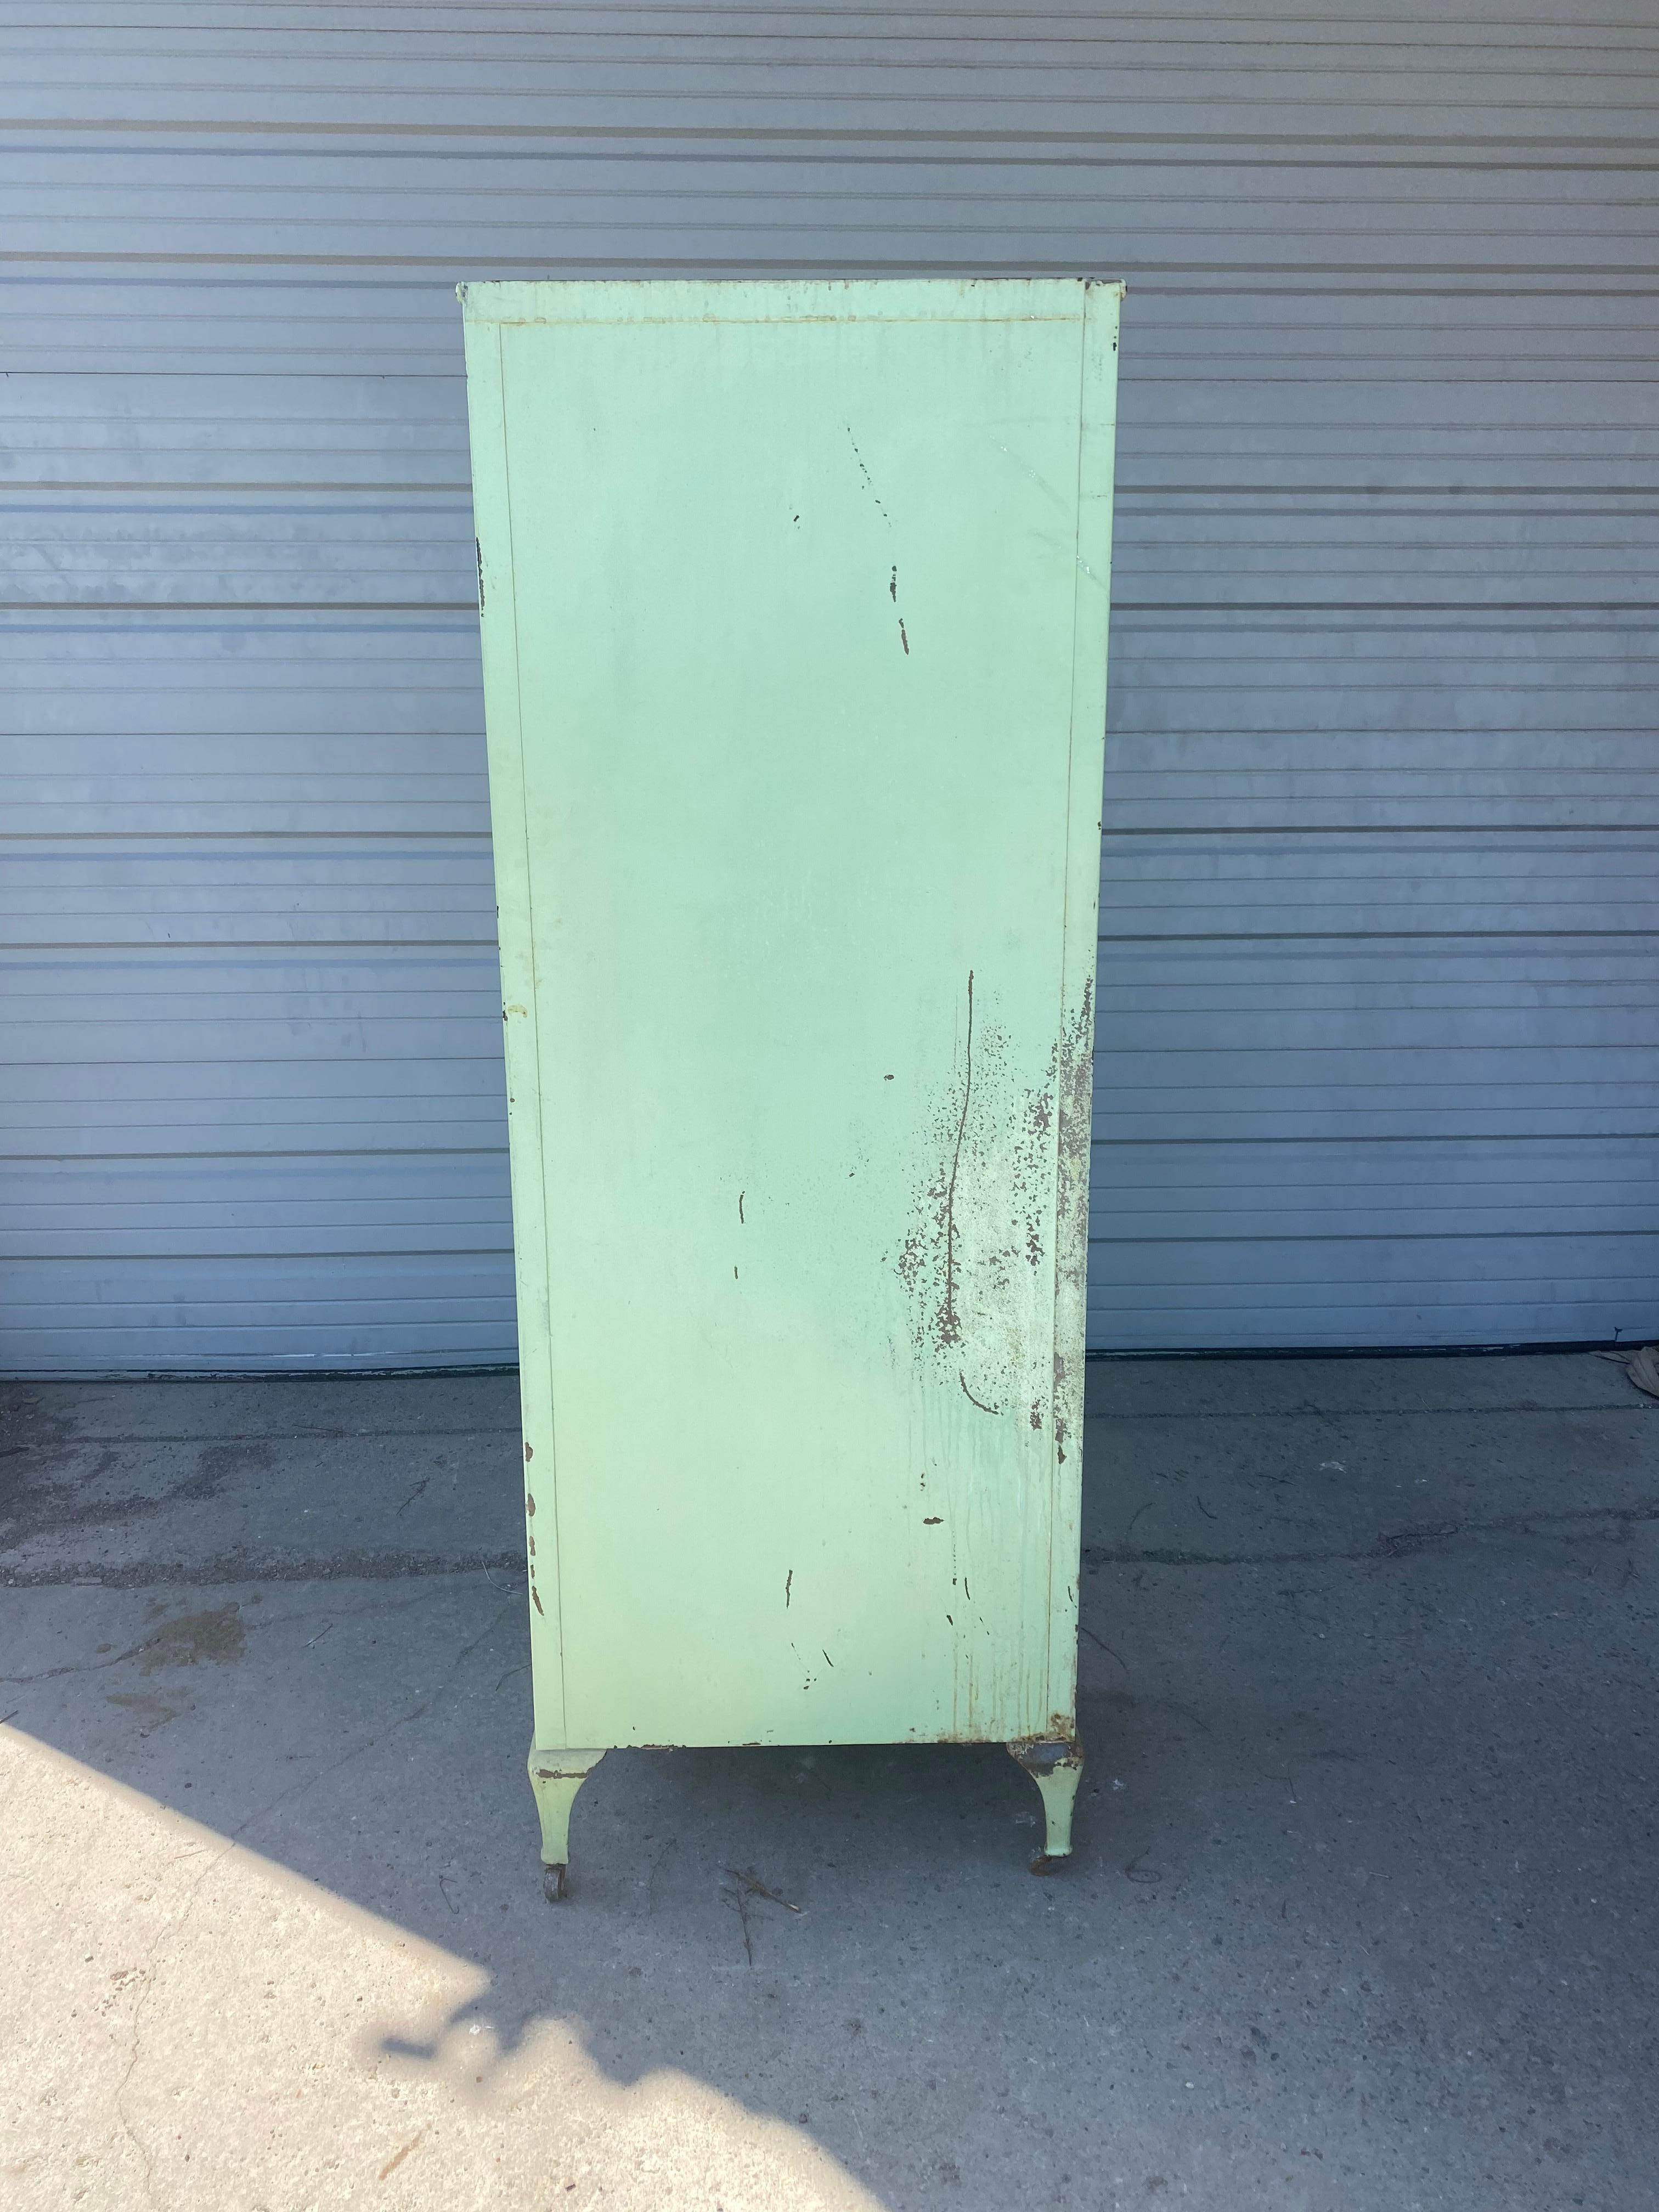 Classic Industrial / Architectural Medical, Dr's Cabinet, Storage, Display In Distressed Condition In Buffalo, NY